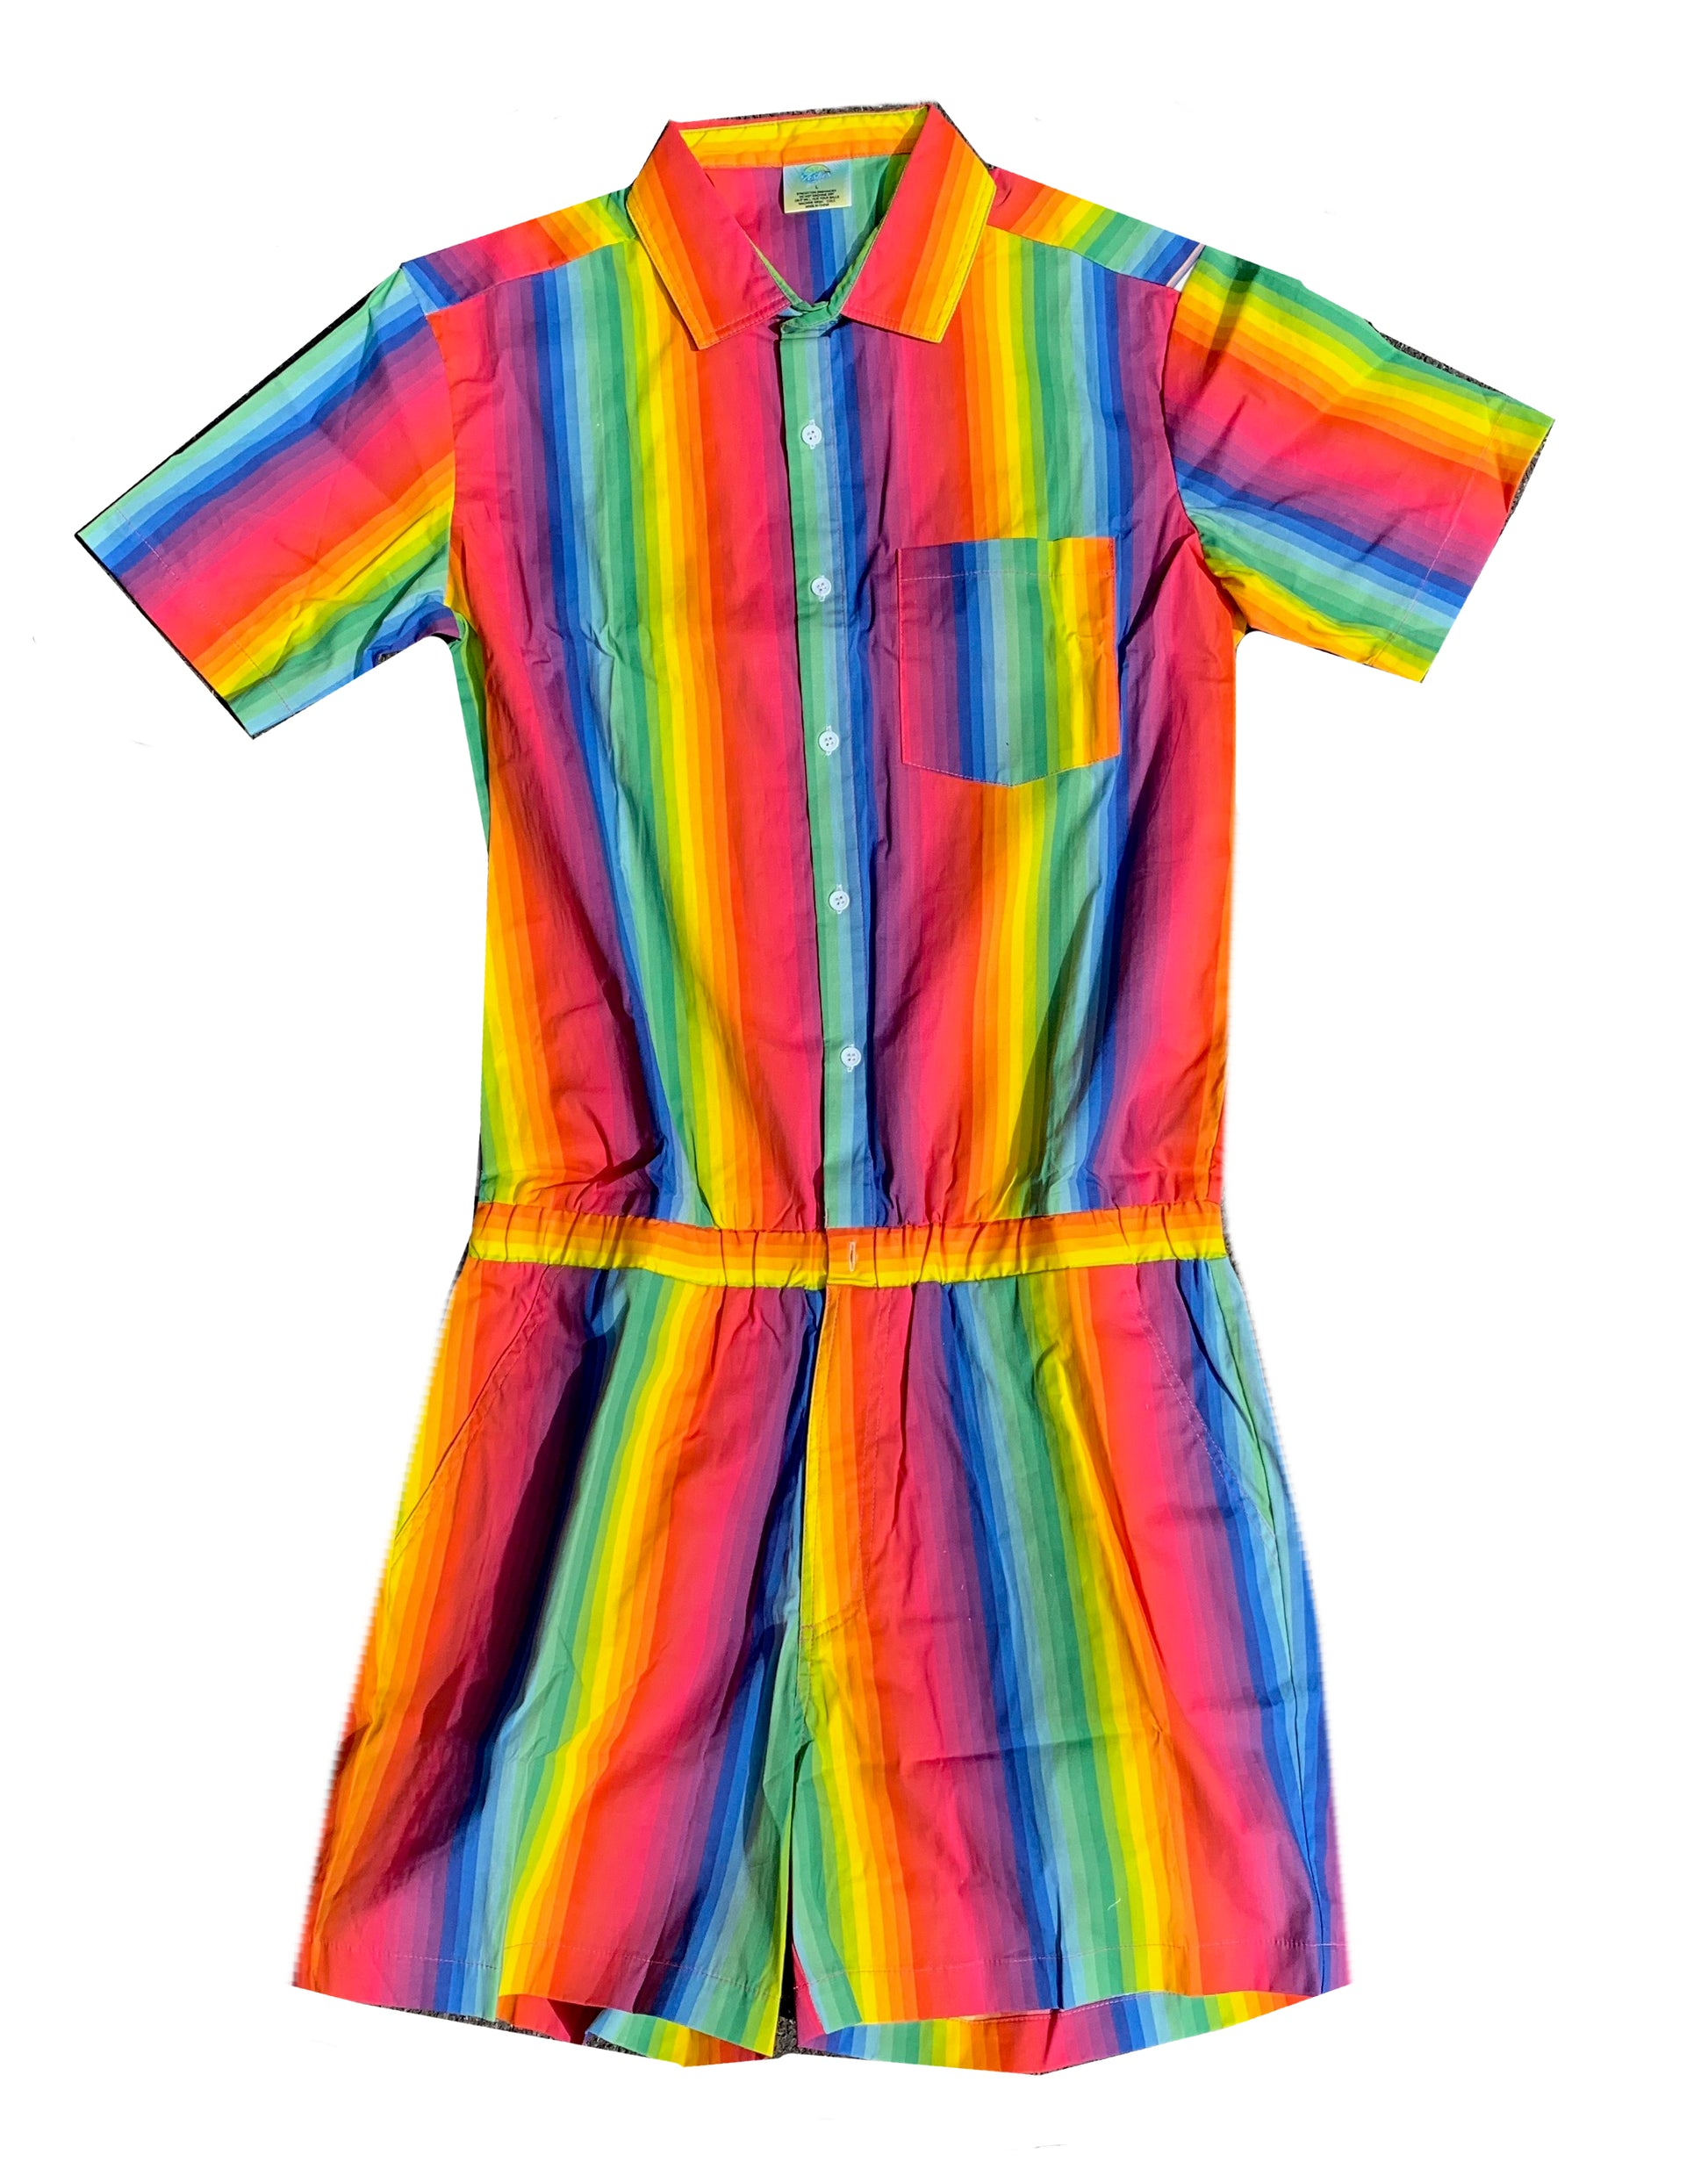 Gay Pride Outfit